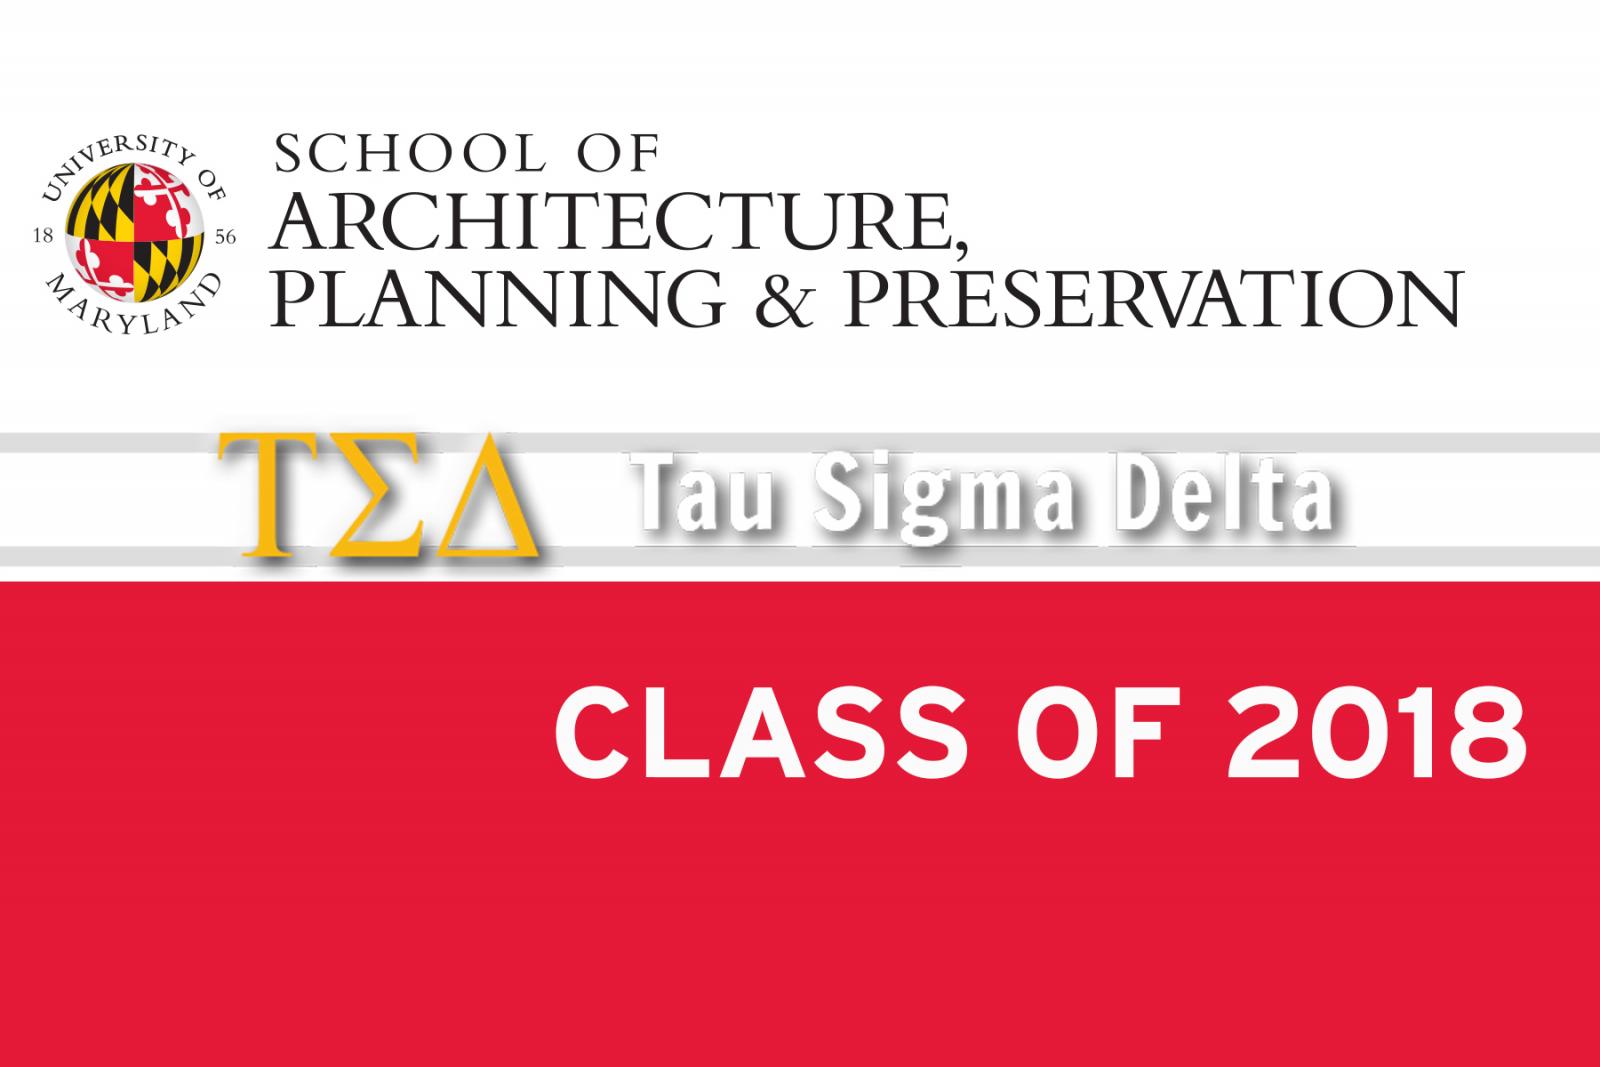 “Craftsmen, Skilled and Trained”: Congratulations to UMD’s Tau Sigma Delta Class of 2018!